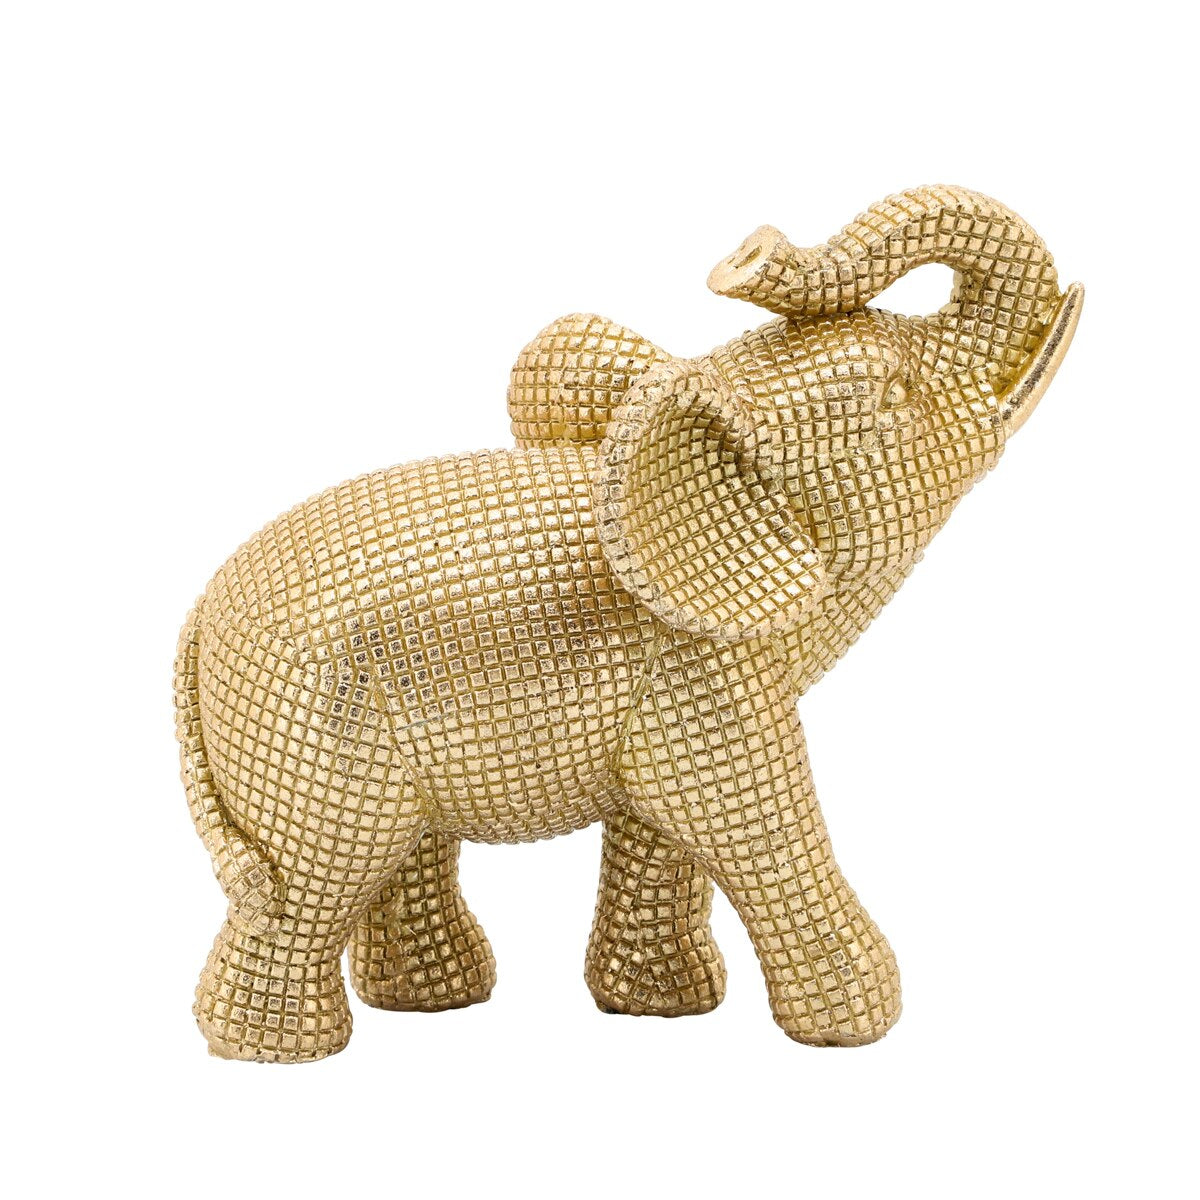 Resin 7" Elephant Table Accent, Gold